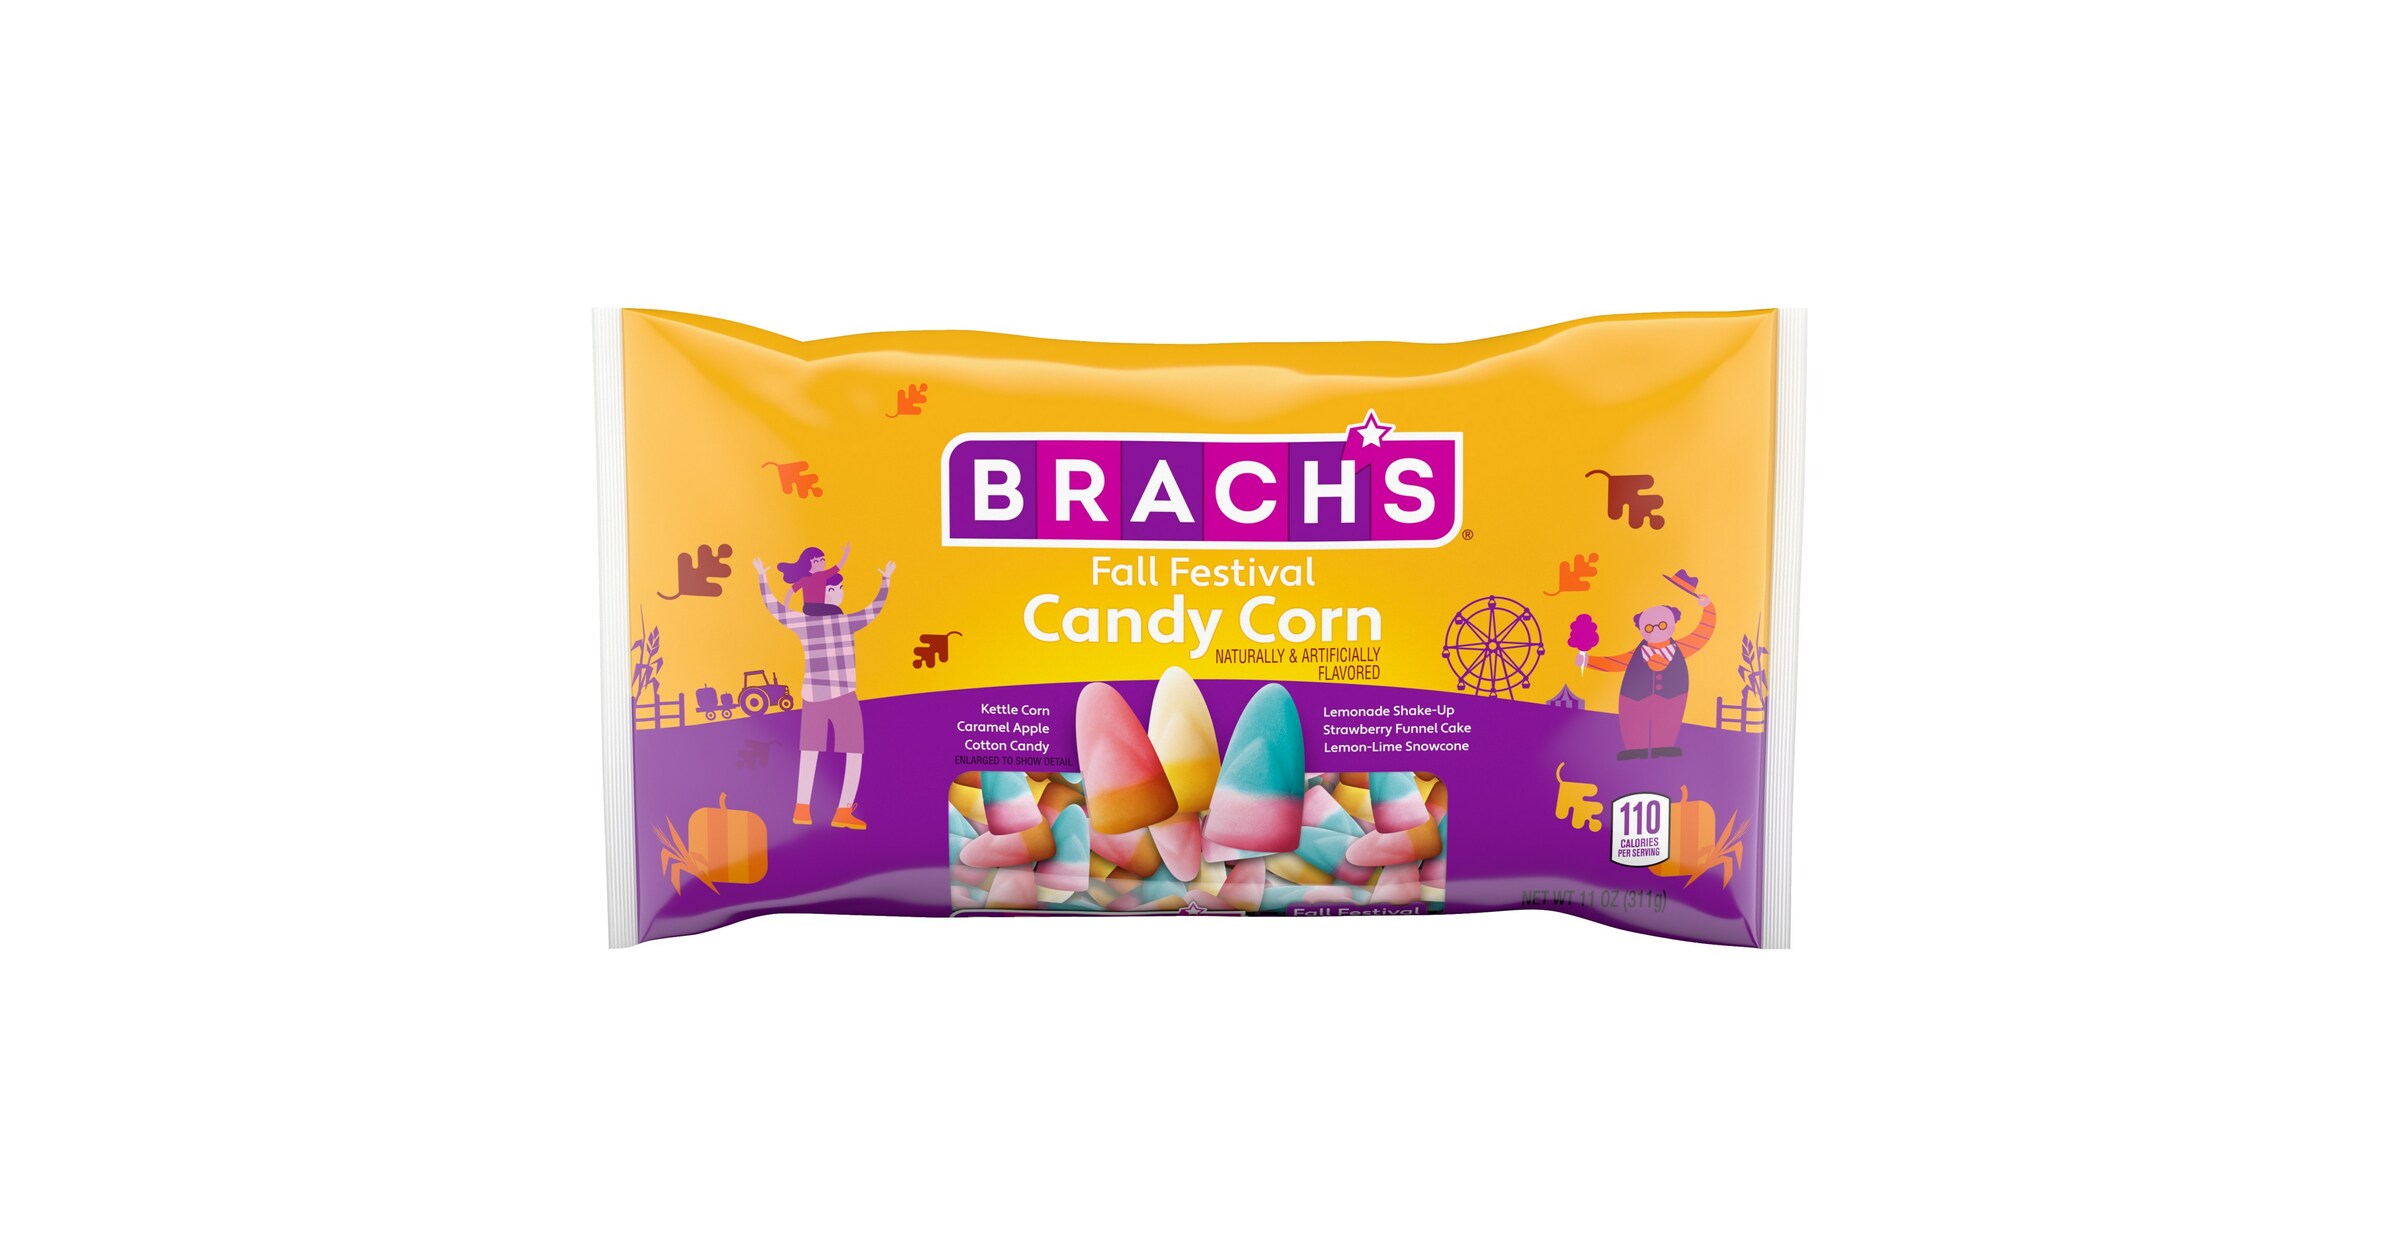 BRACH'S® Launches First-Ever Candy Corn Club to Give Superfans a Chance to  Win Exclusive Access to Candy Corn Year-Round